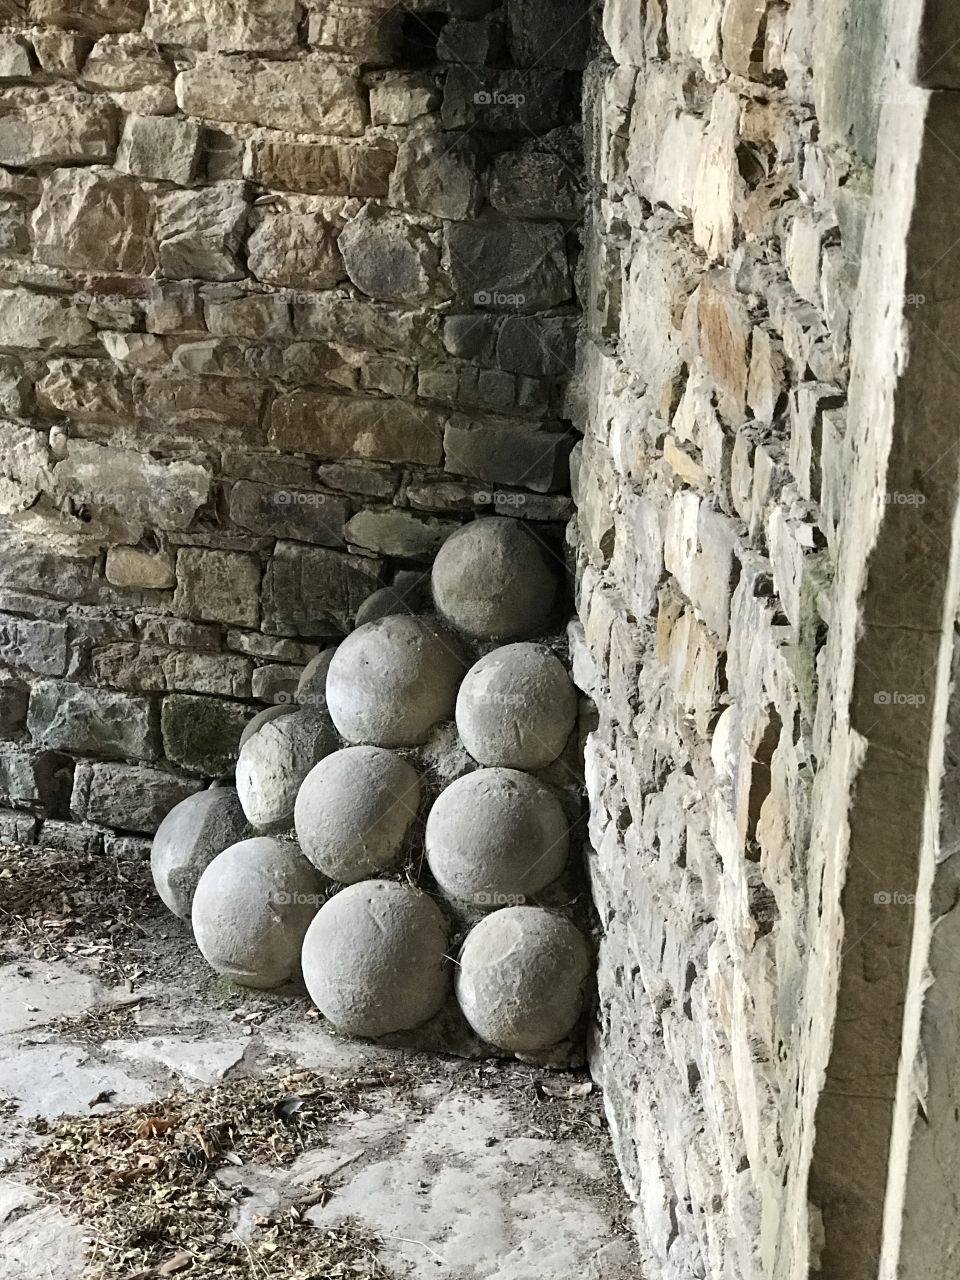 Cannonballs in the corner, down a derelict path, in the lookout at Fort Belvedere, left from a time gone by!